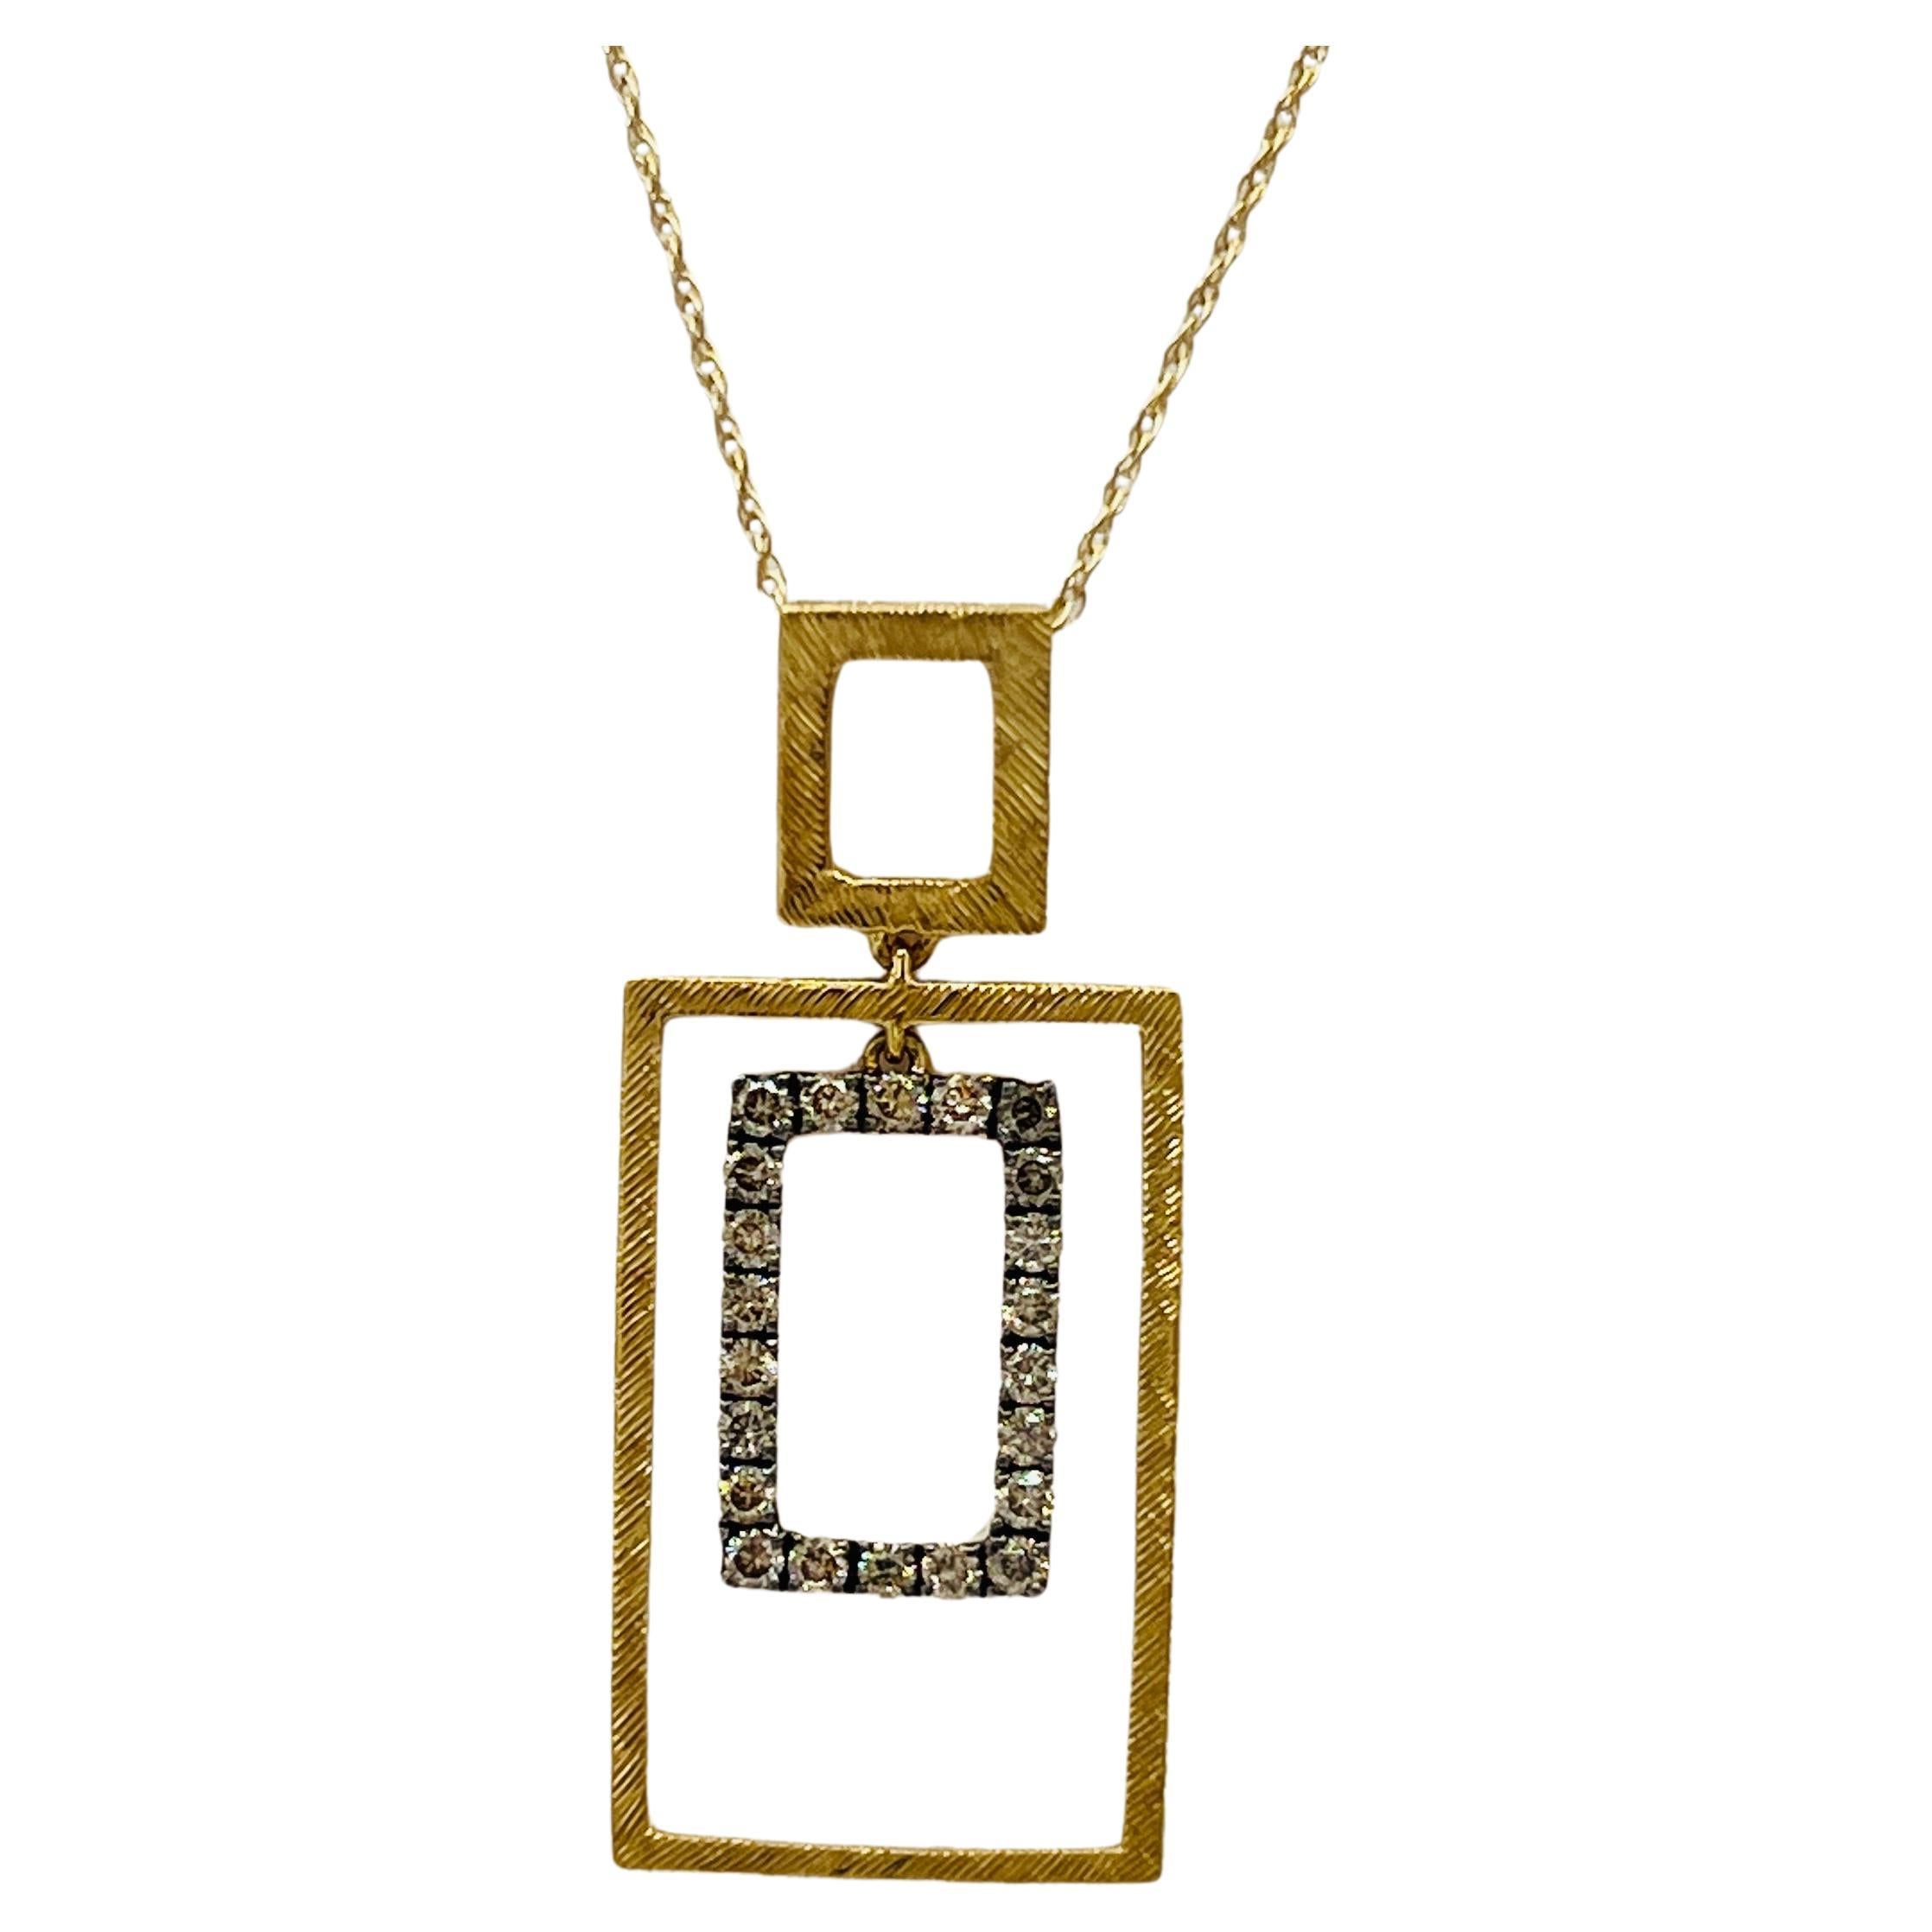 Champagne Diamond Round Pendant Necklace in 14K Yellow Gold